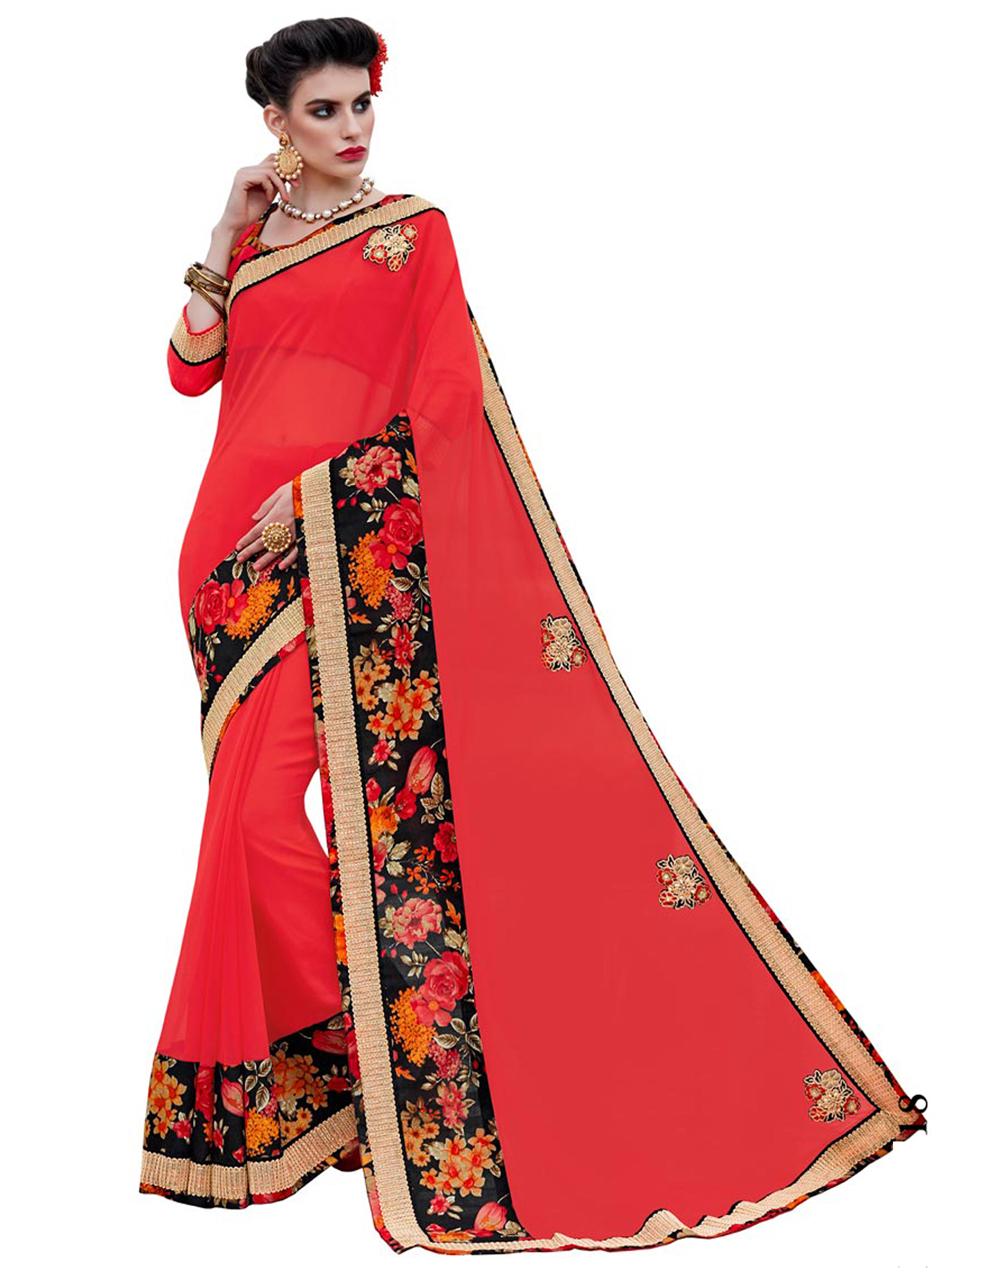 Red Georgette  Half and Half Saree With Blouse IW14718